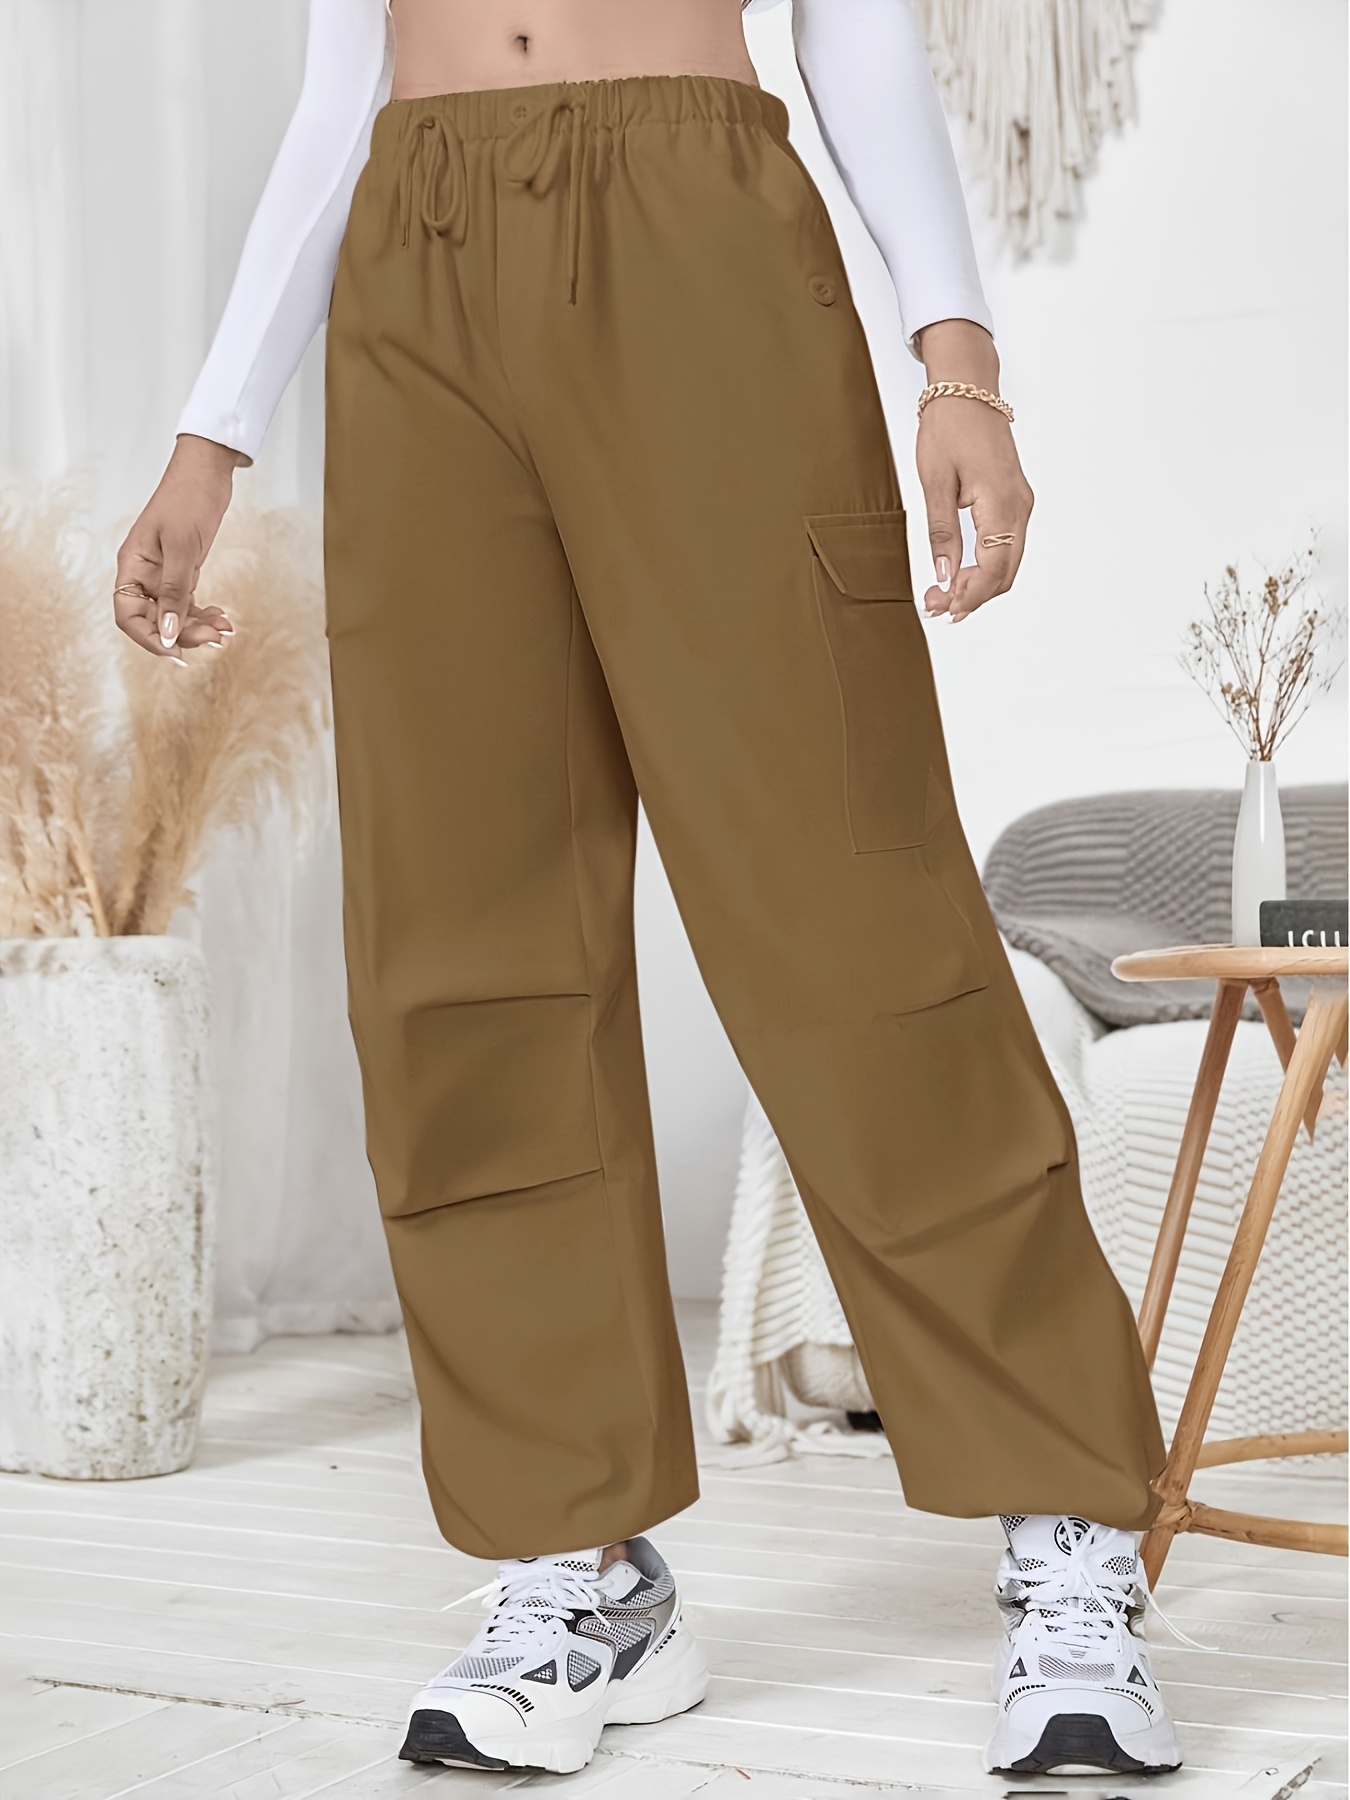 Lucuna Women's Satin Cargo Pants Y2K High Waisted Multi-Pocket Straight Leg  Baggy Casual Trousers at  Women's Clothing store